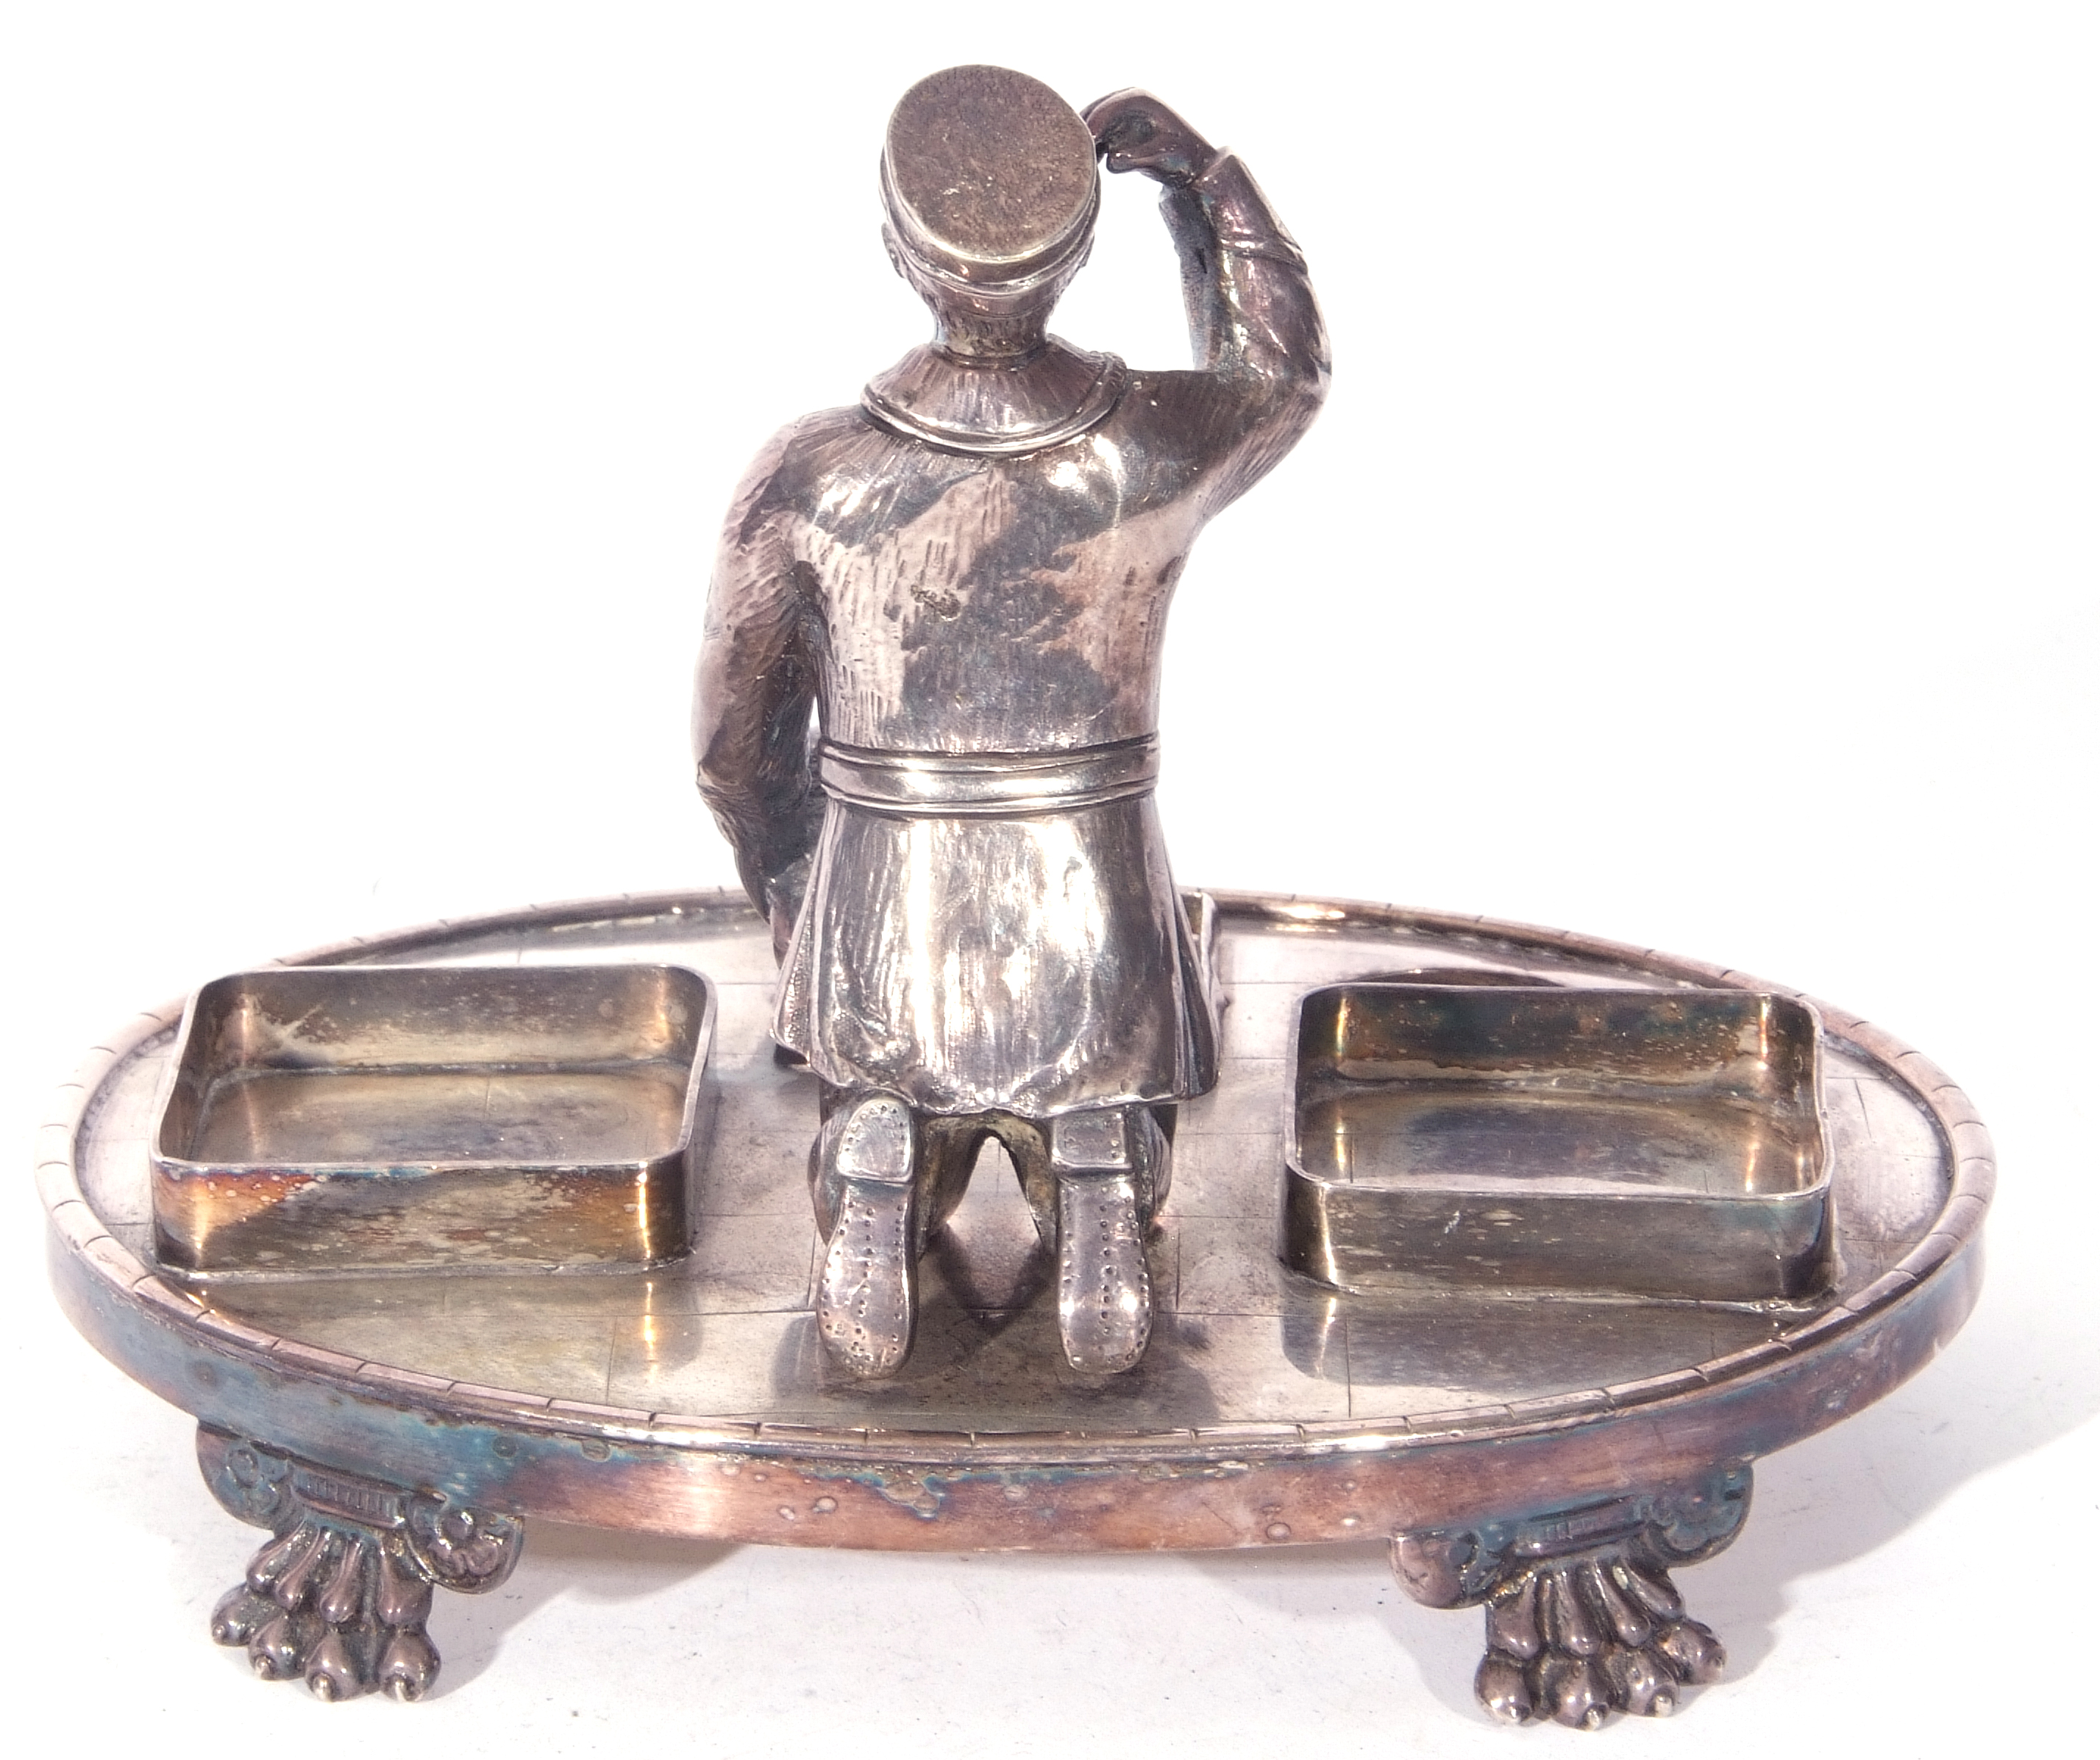 Unusual Victorian silver plated desk stand mounted with a figure of a shoeshine boy set on an oval - Image 3 of 3